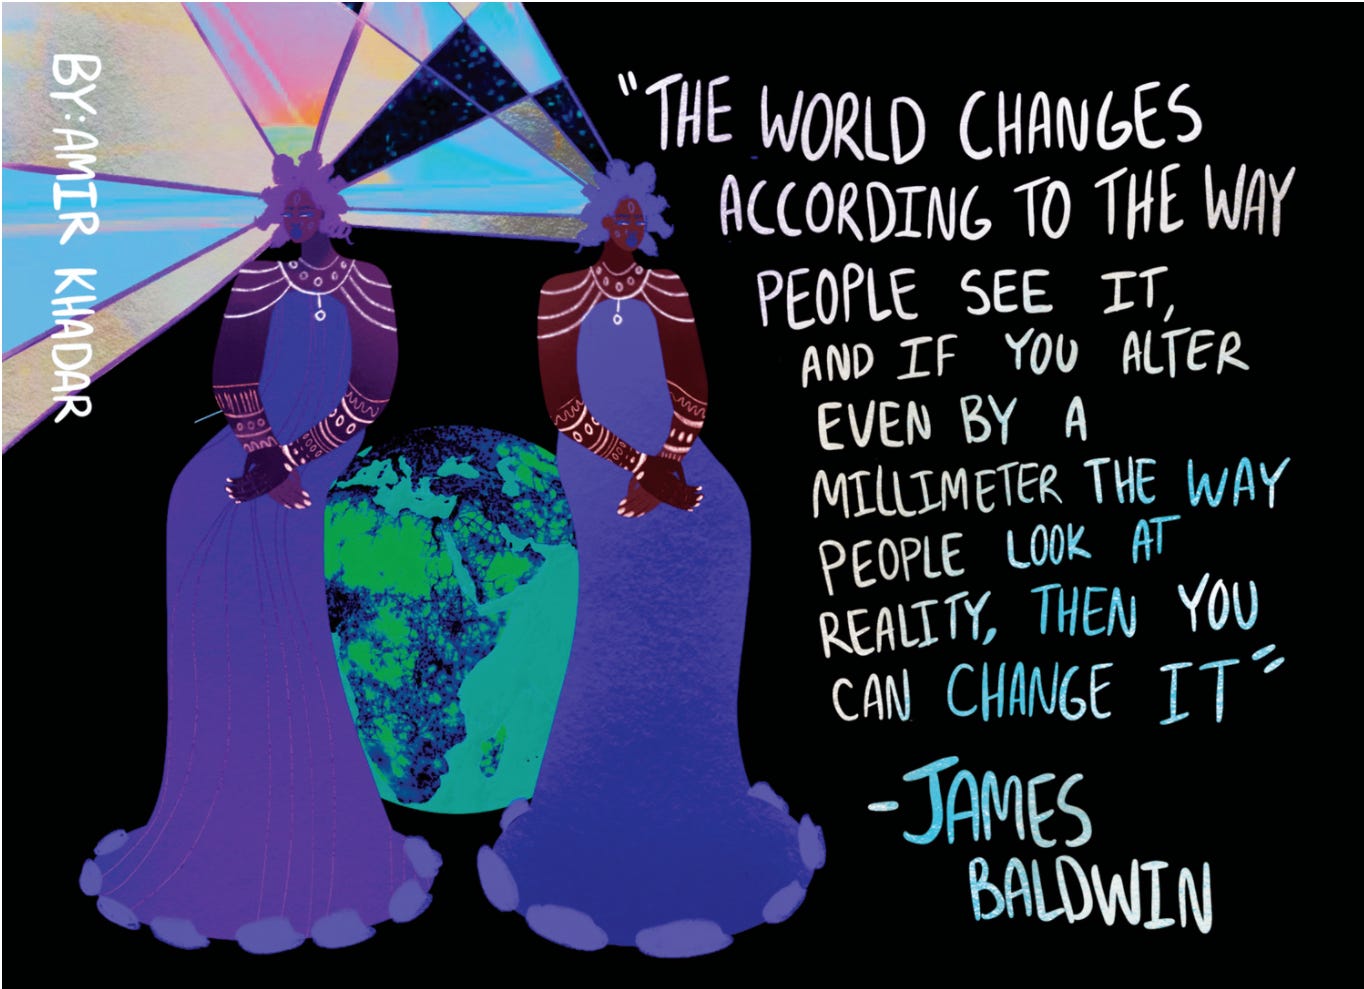 "The world changes according to how people see it, and if you alter even by a millimeter the way people look at reality, then you can change it." -James Baldwin